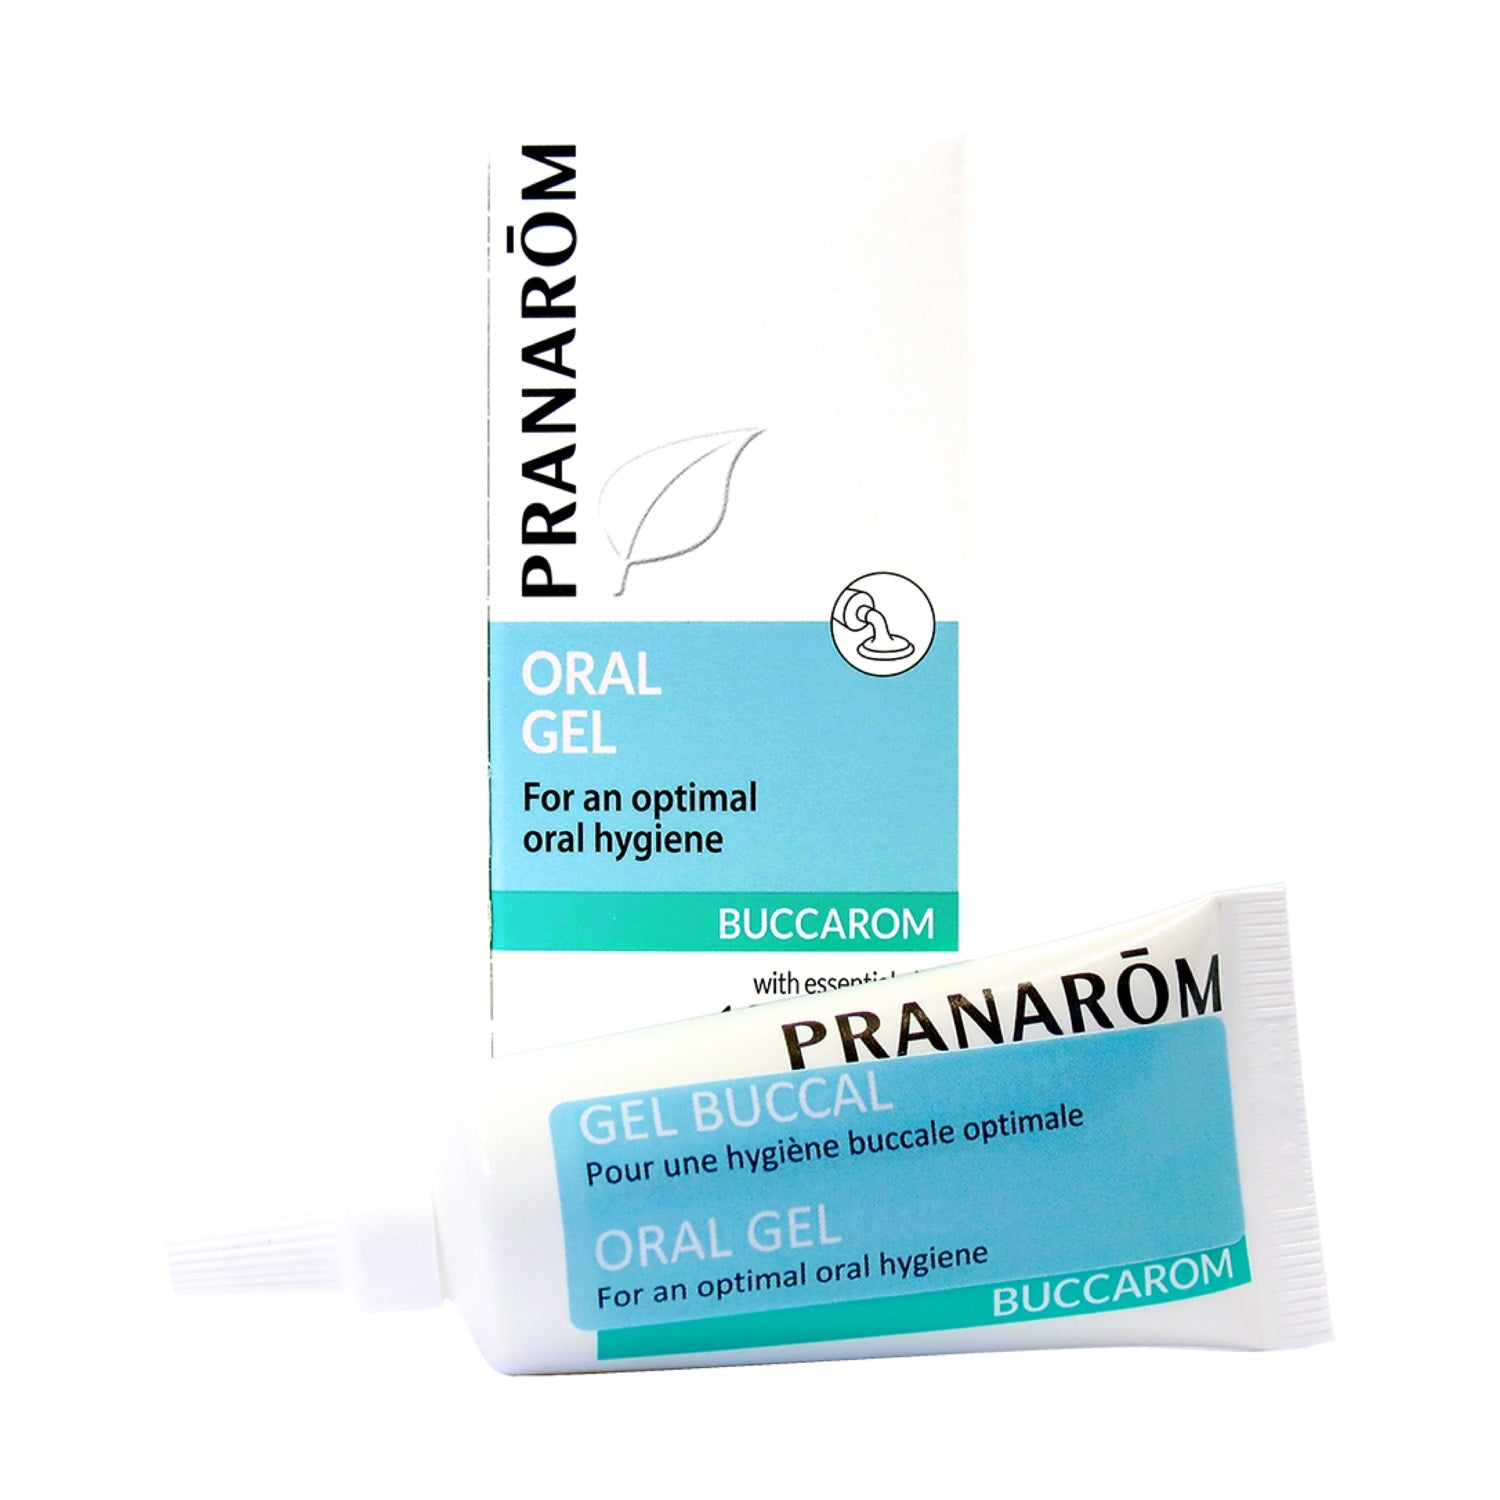 Buccarom Oral Gel 100% pure and natural essential oils 15 ml